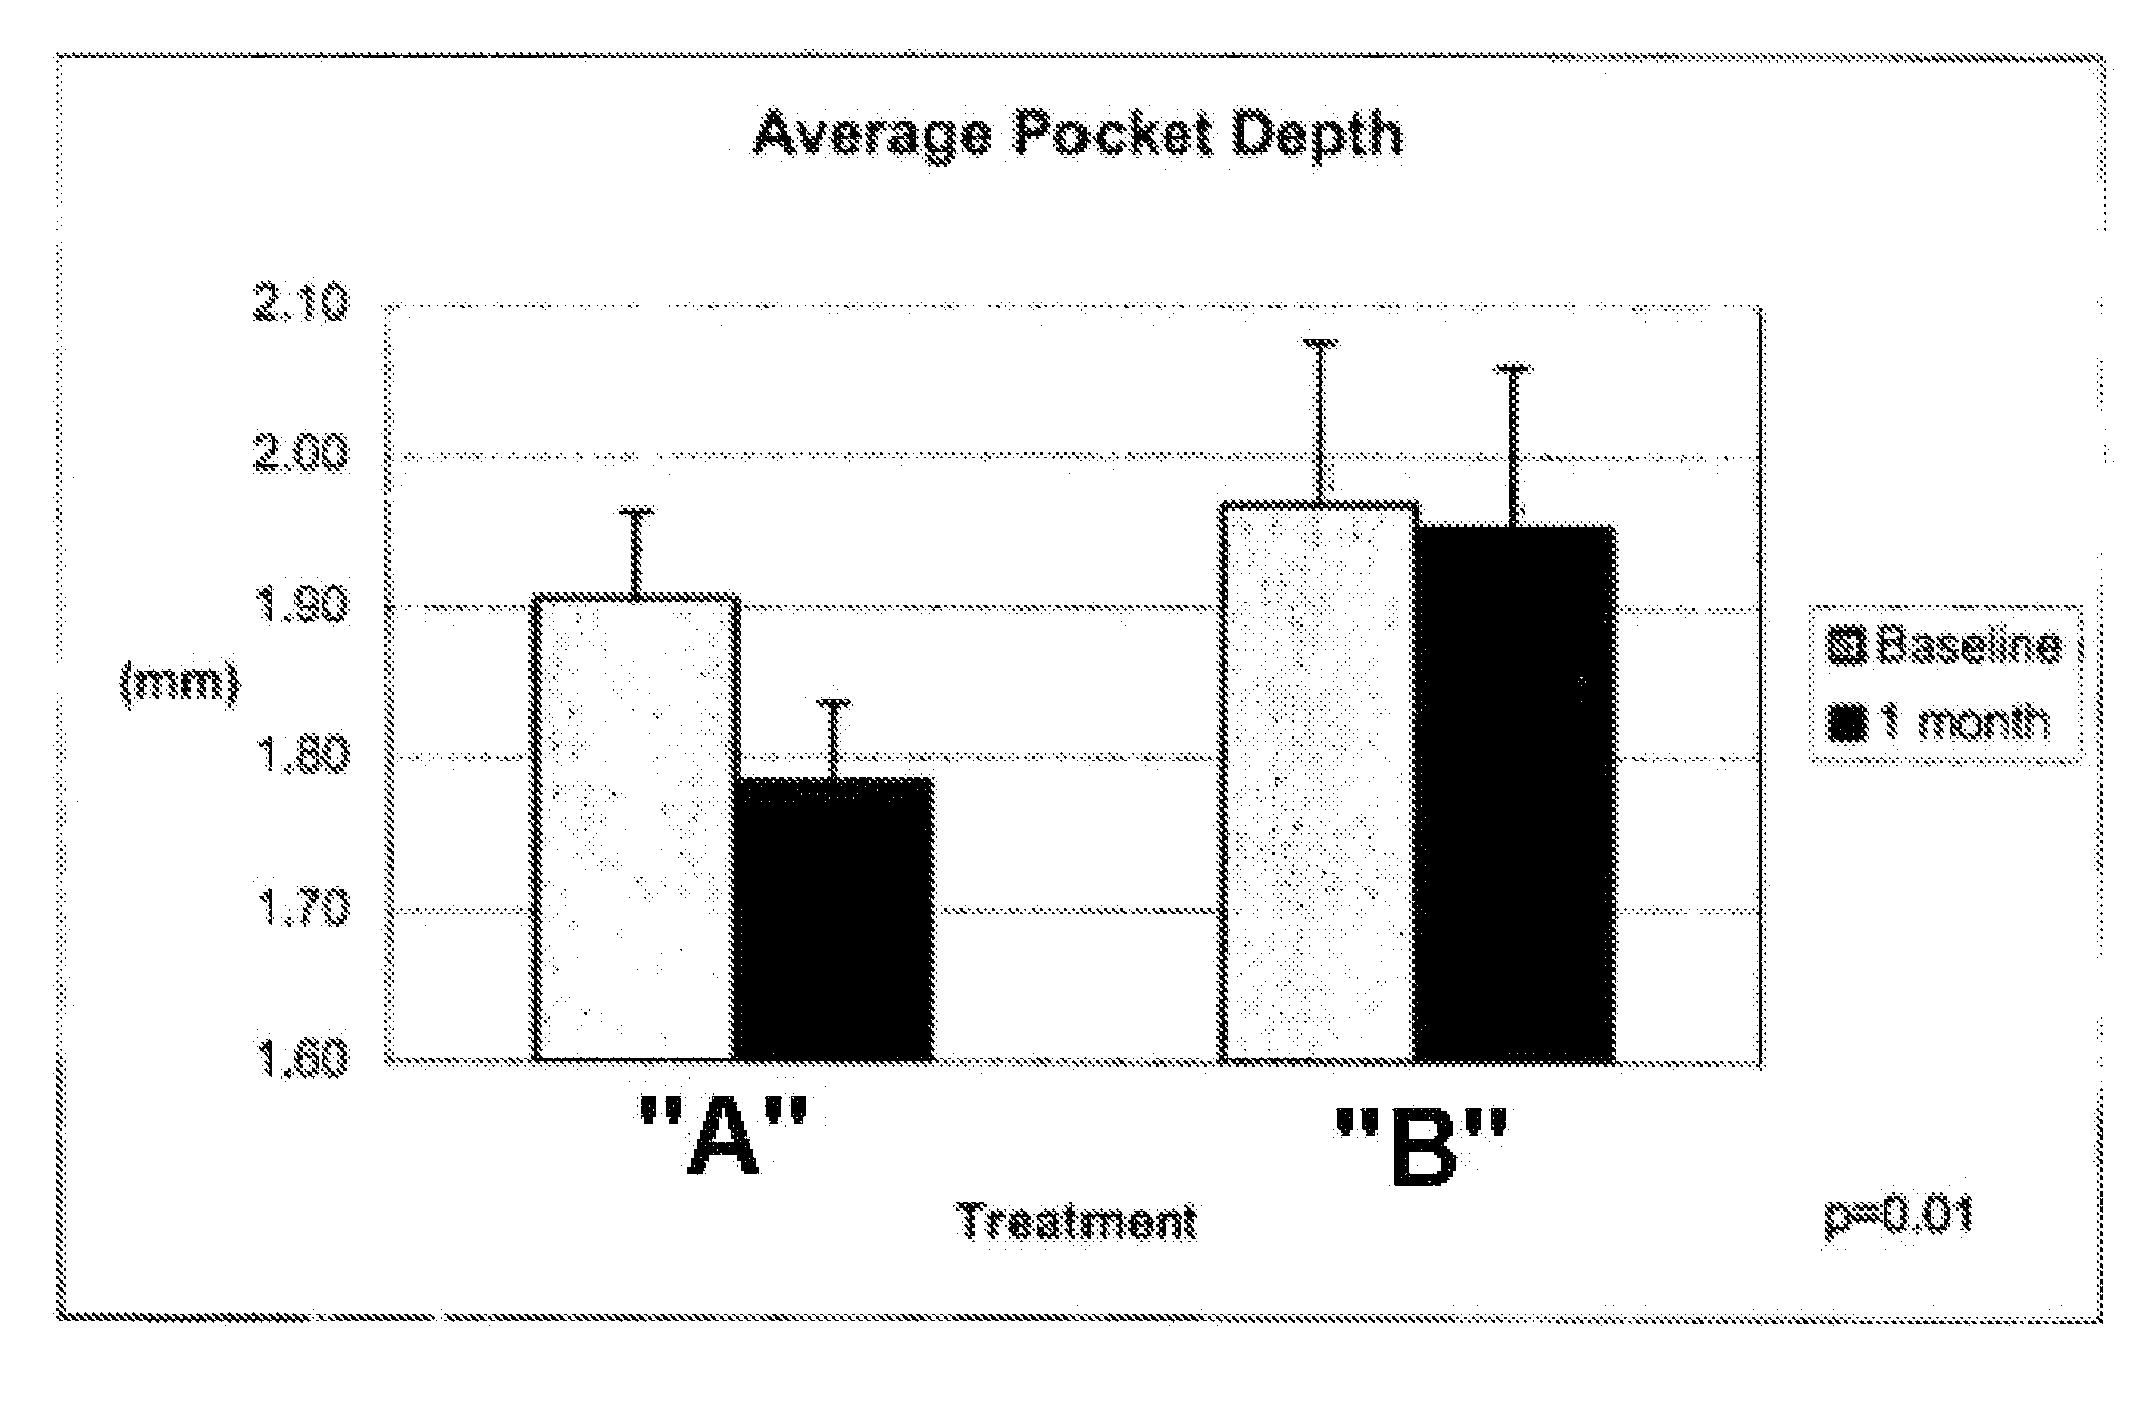 Oral Care Compositions Containing a Mixed Tocopherol Component